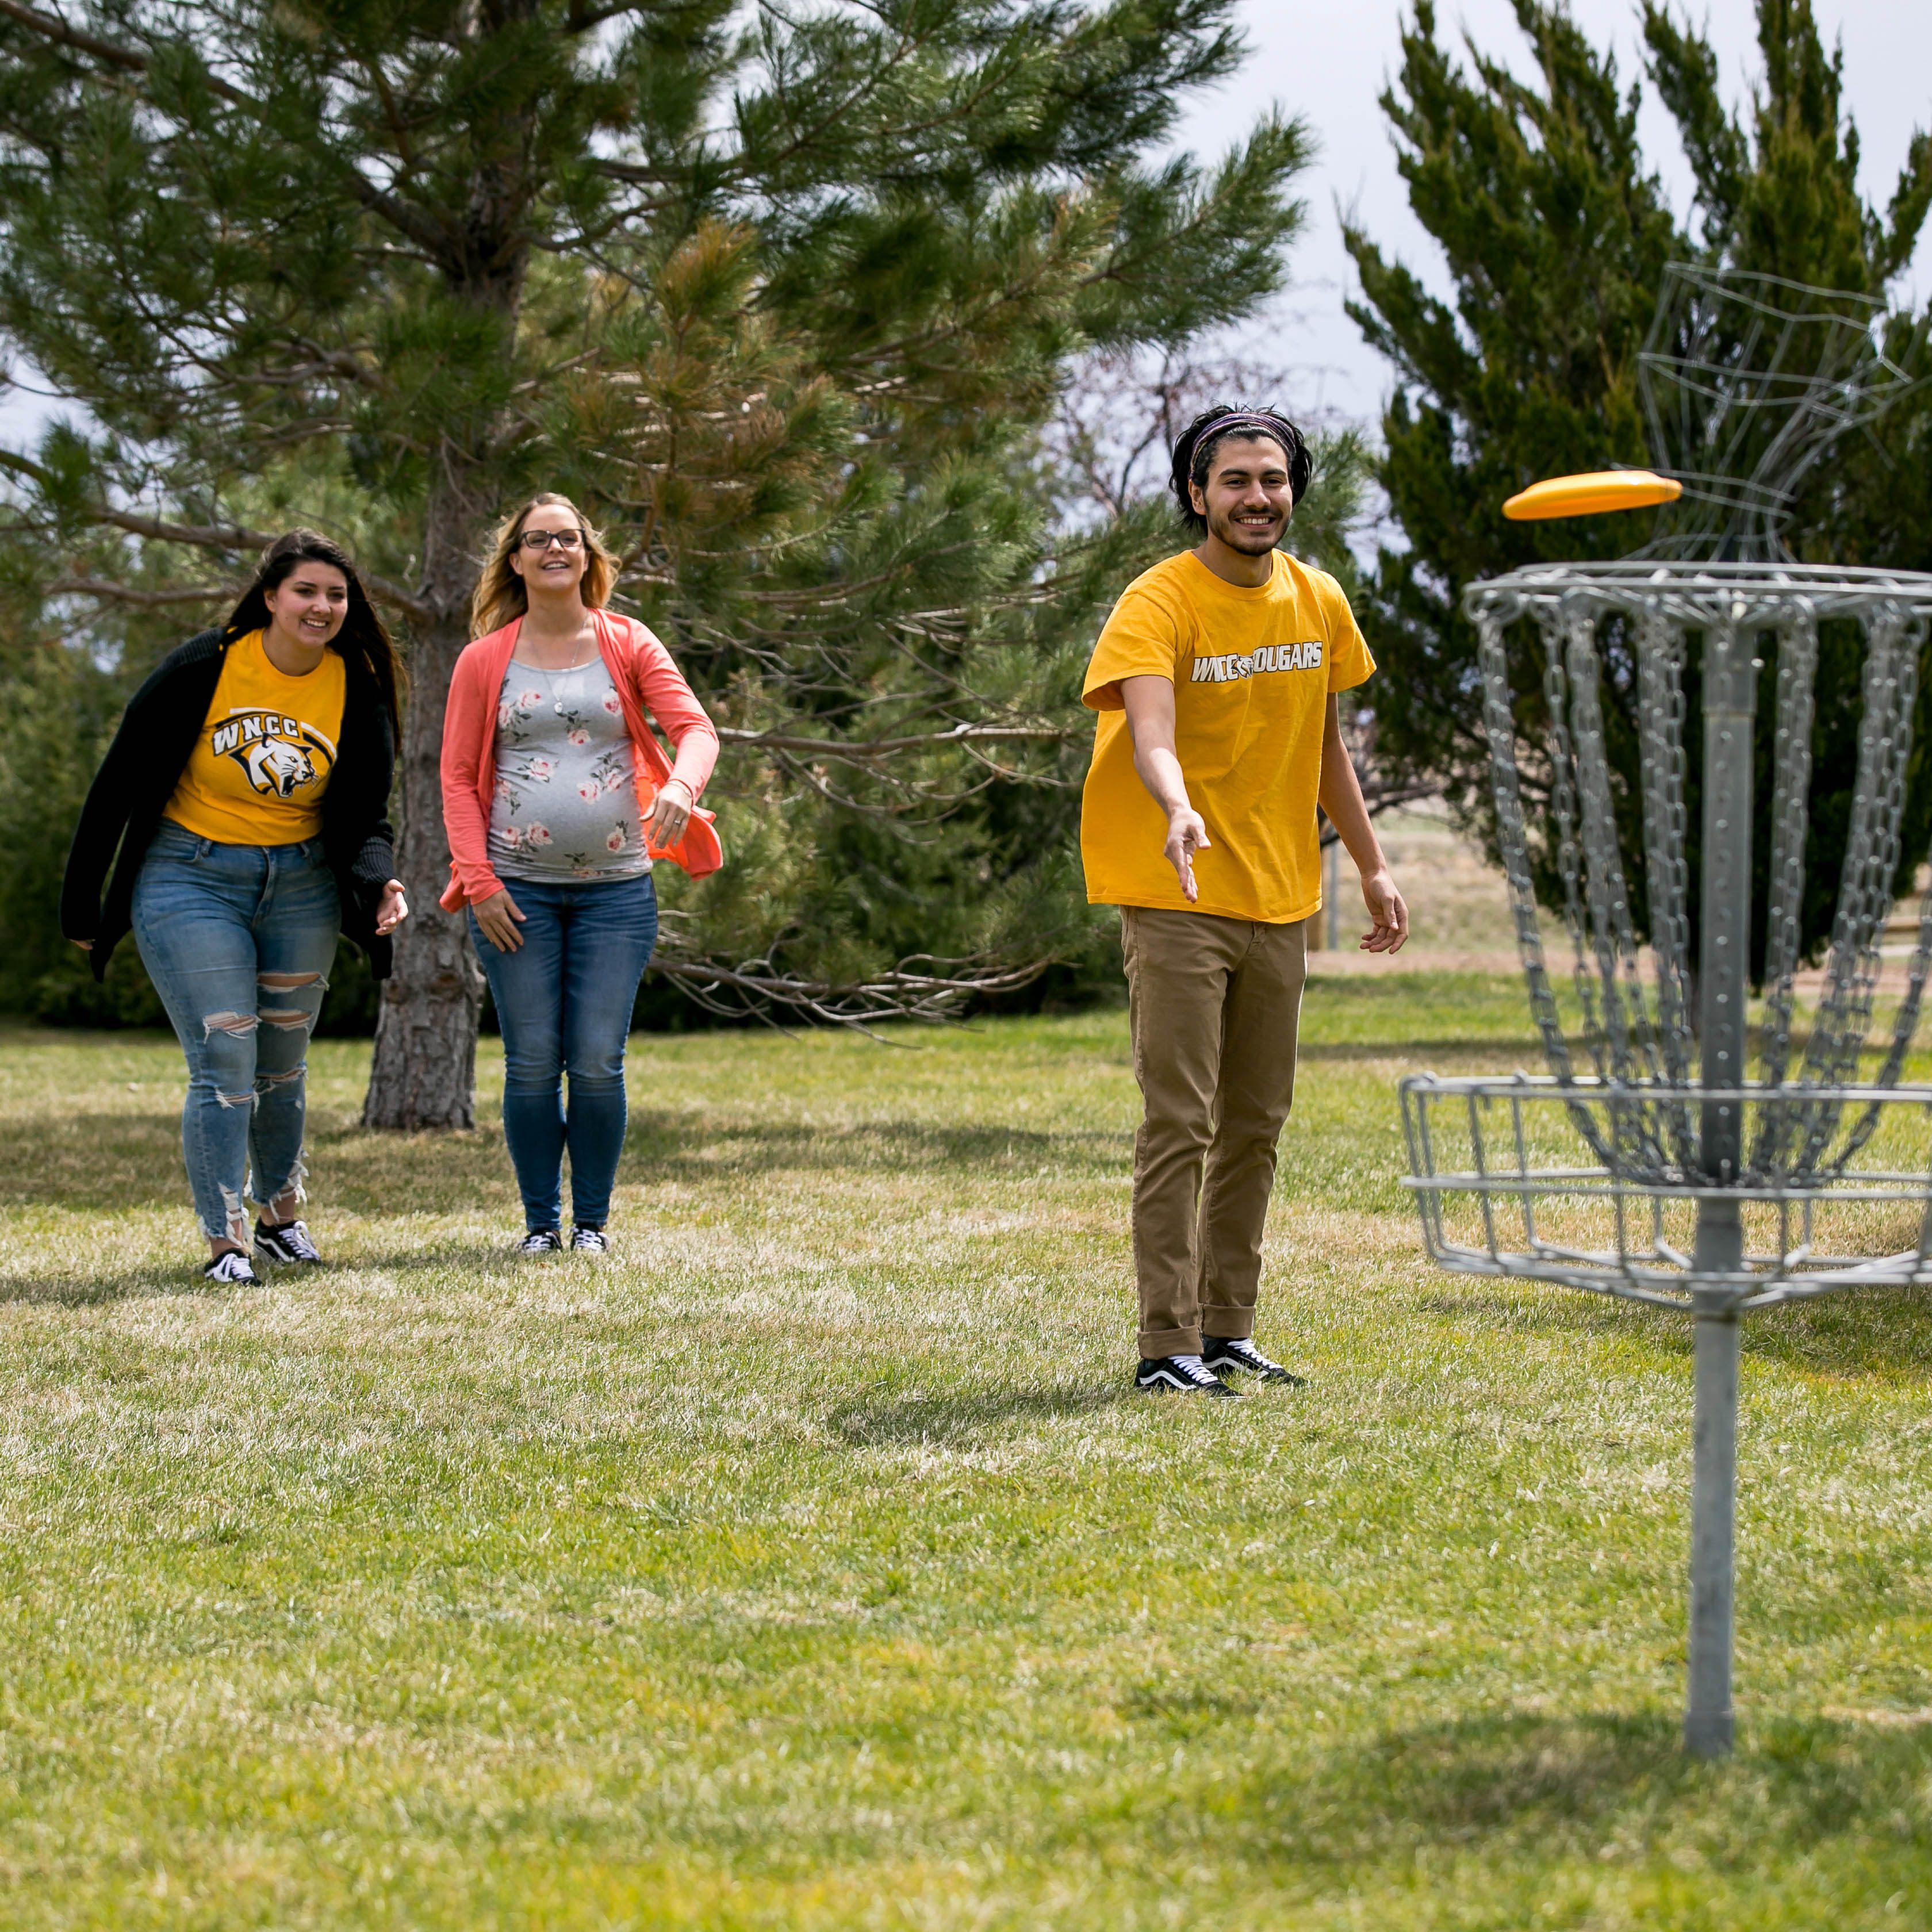 wncc sidney students playing disc golf